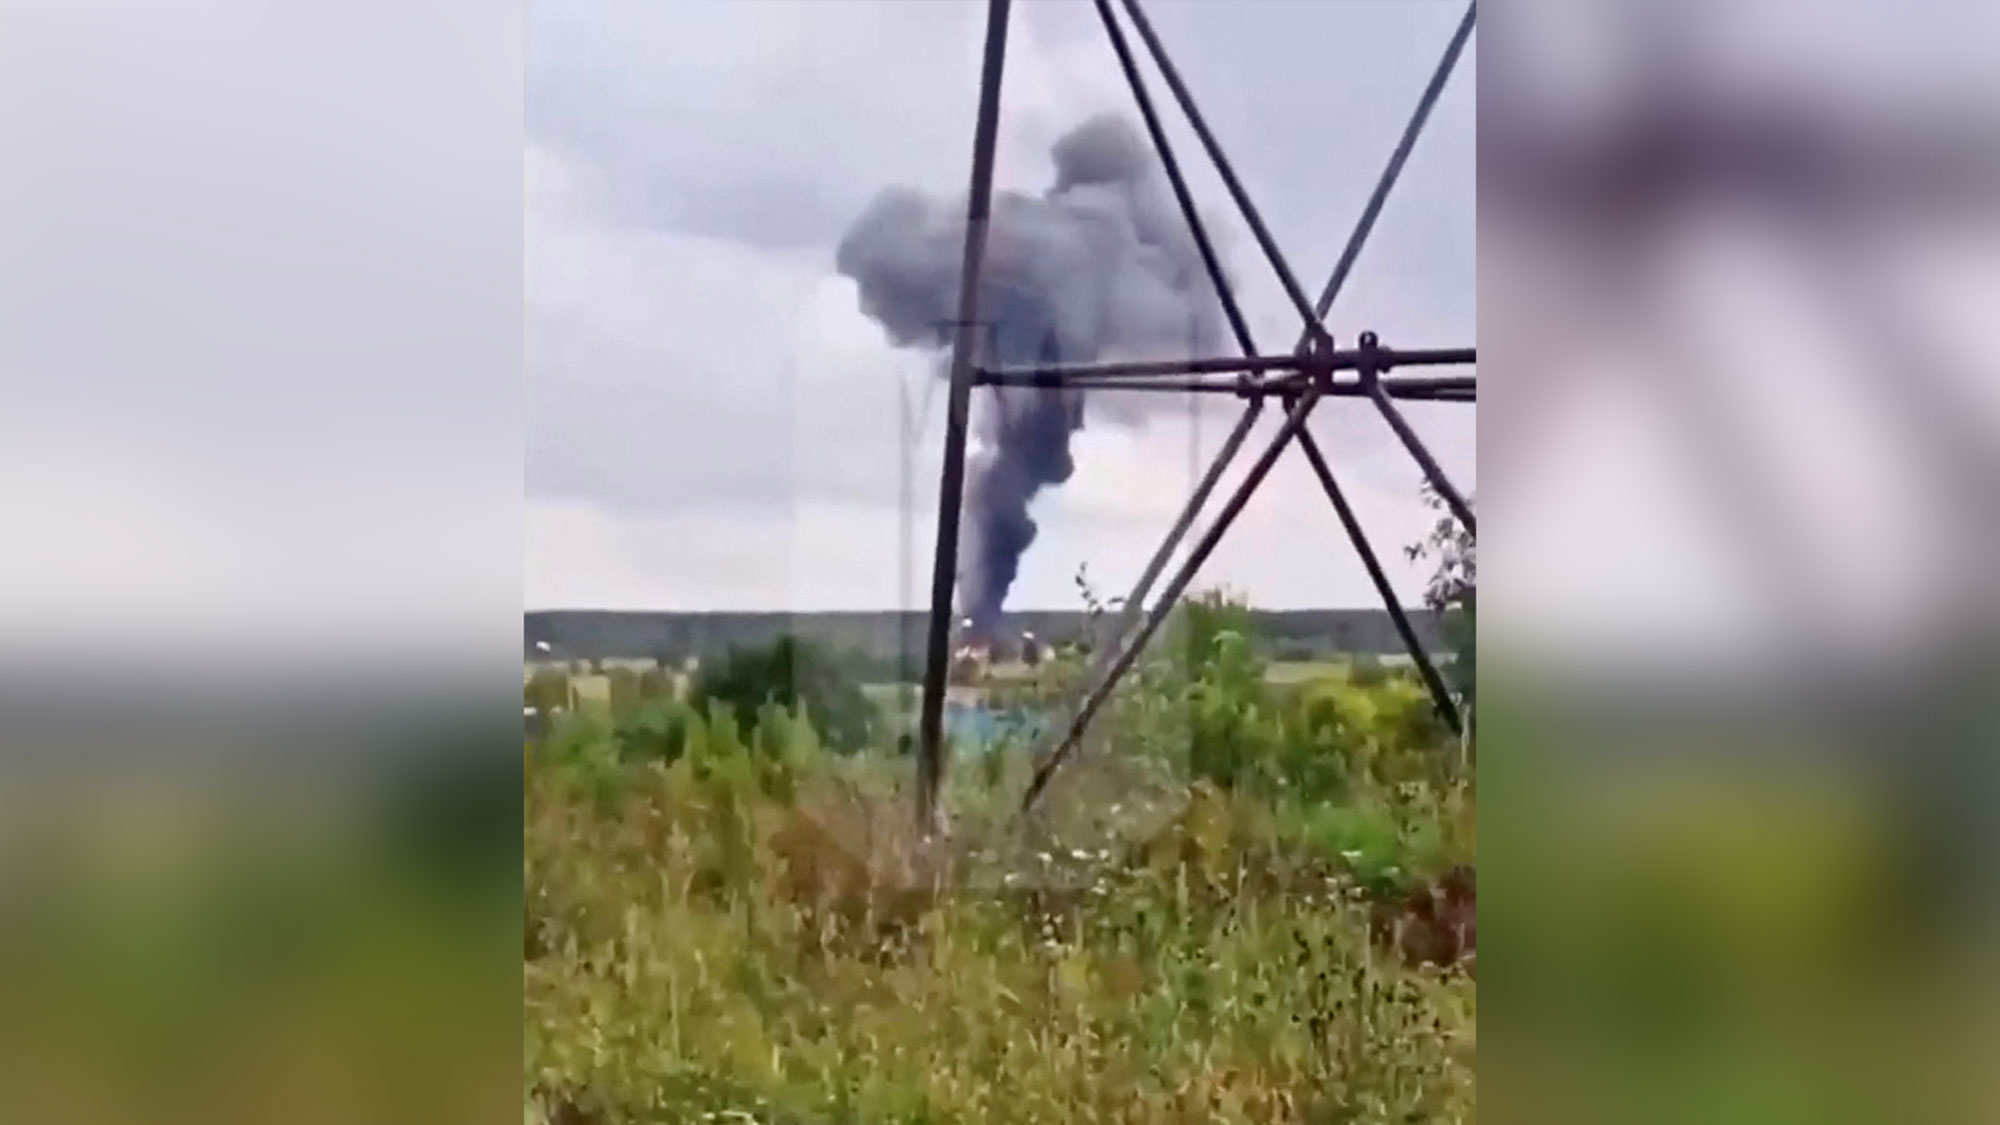 A view shows smoke rising above a plane on fire in the Tver region, Russia, in this still image from video published on Wednesday.